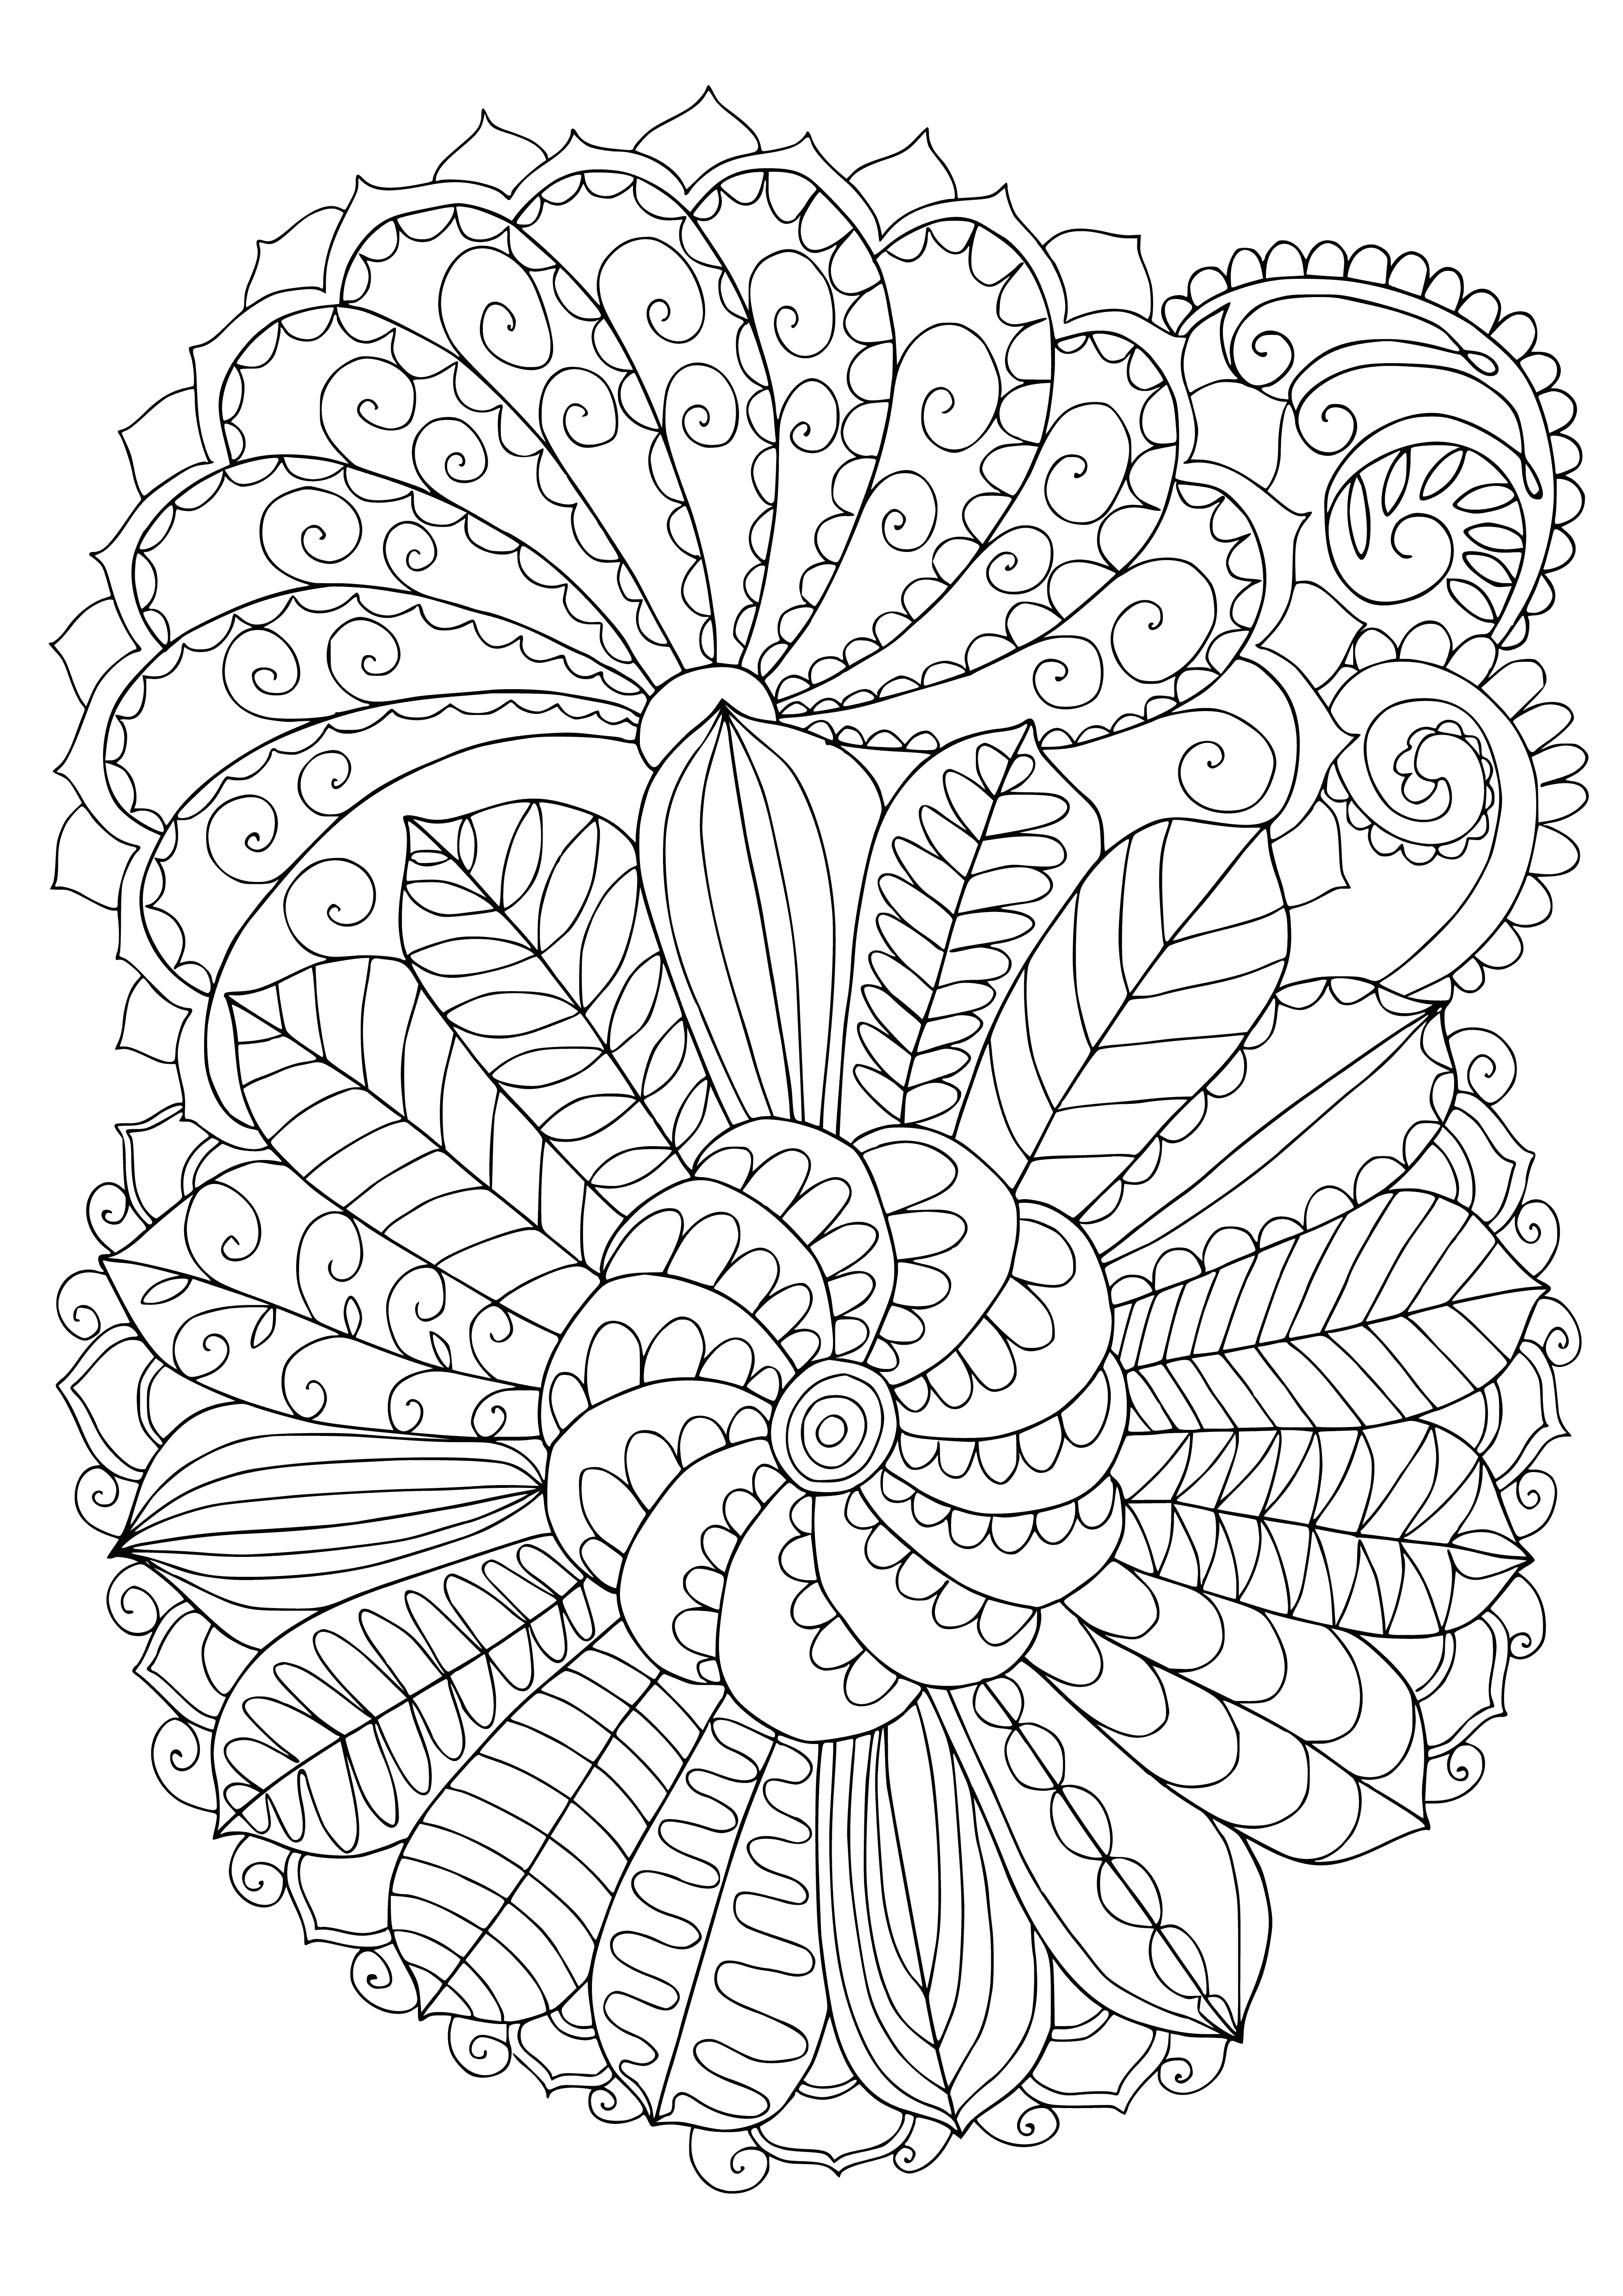 Flower patterns coloring page